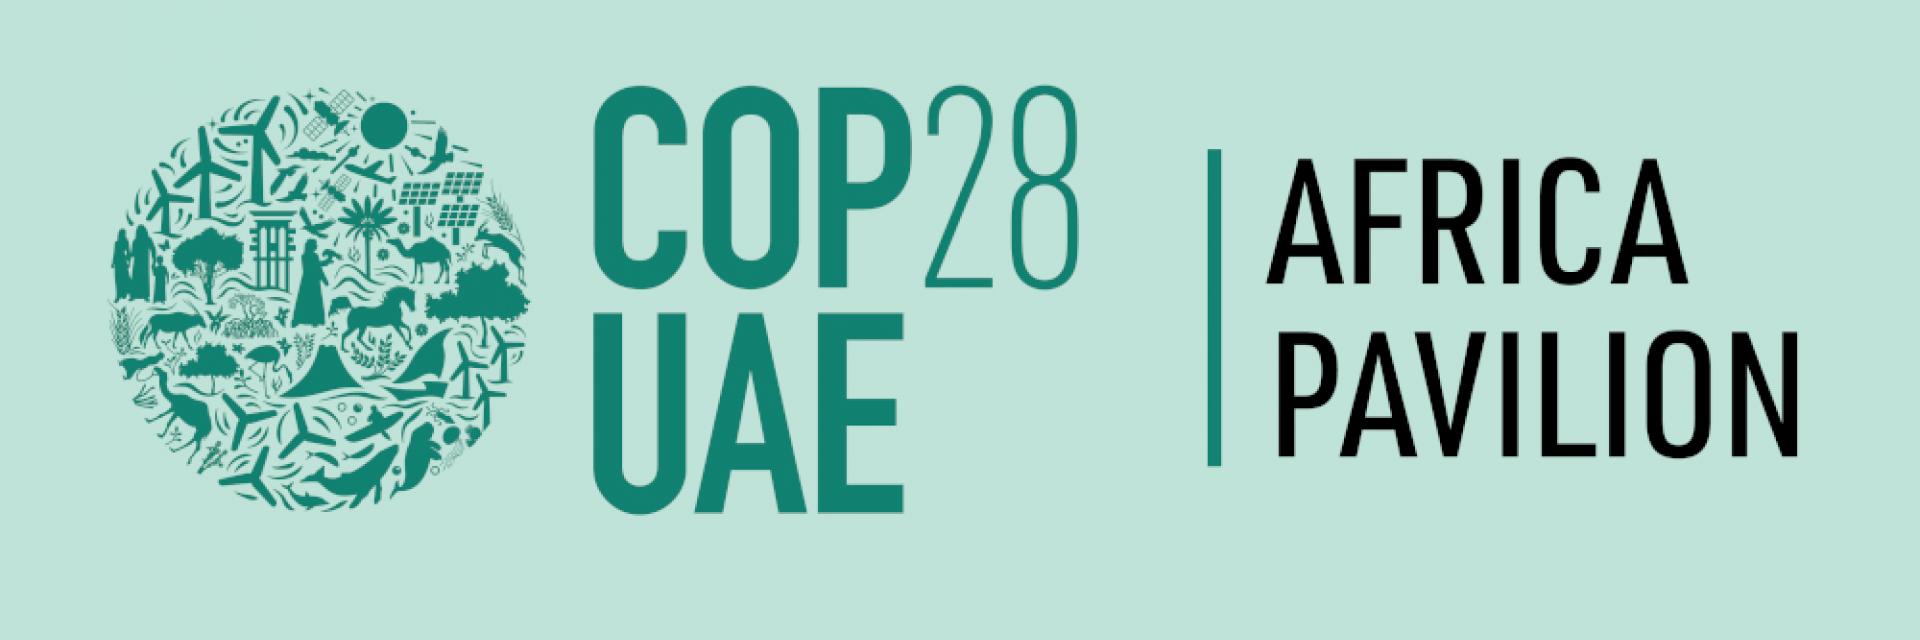 ECA at the 28th Conference of the Parties to the United Nations Framework Convention on Climate Change (COP28)